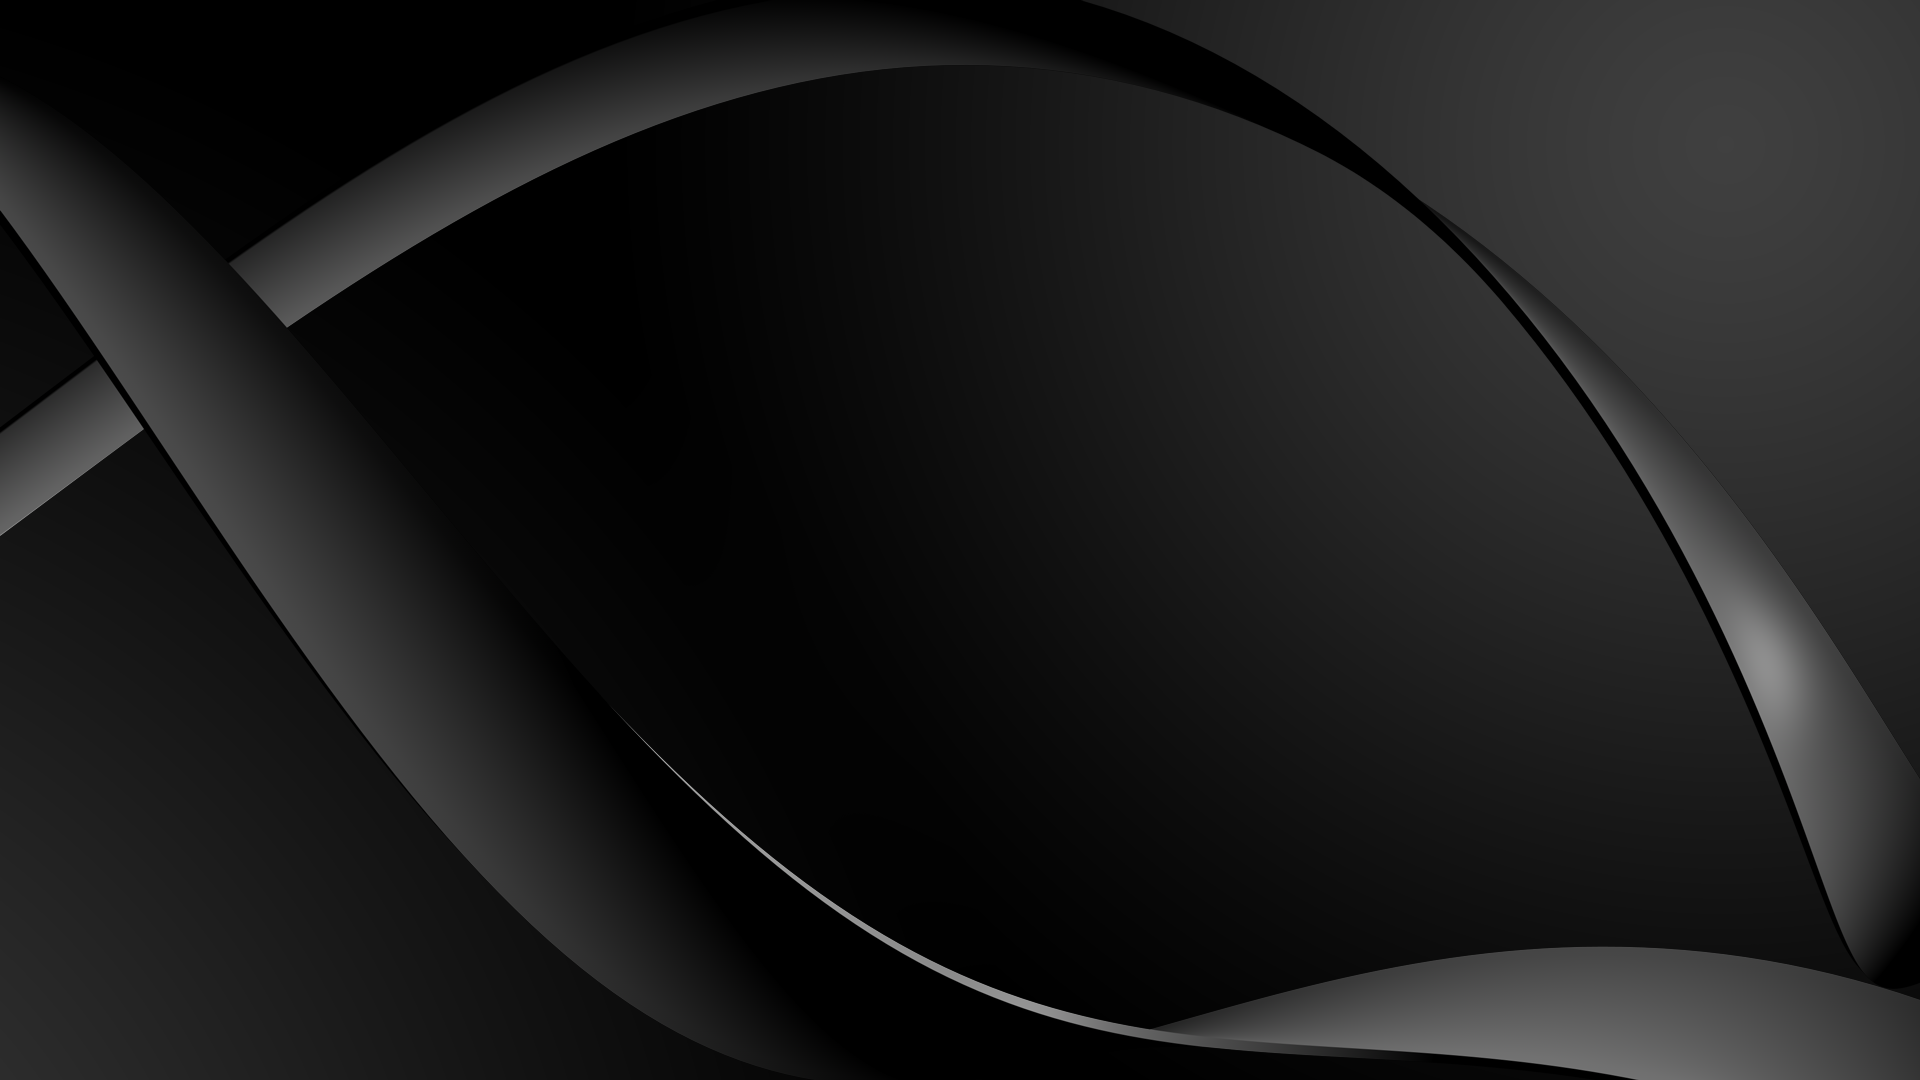 General 1920x1080 black abstract minimalism monochrome shapes simple background gradient